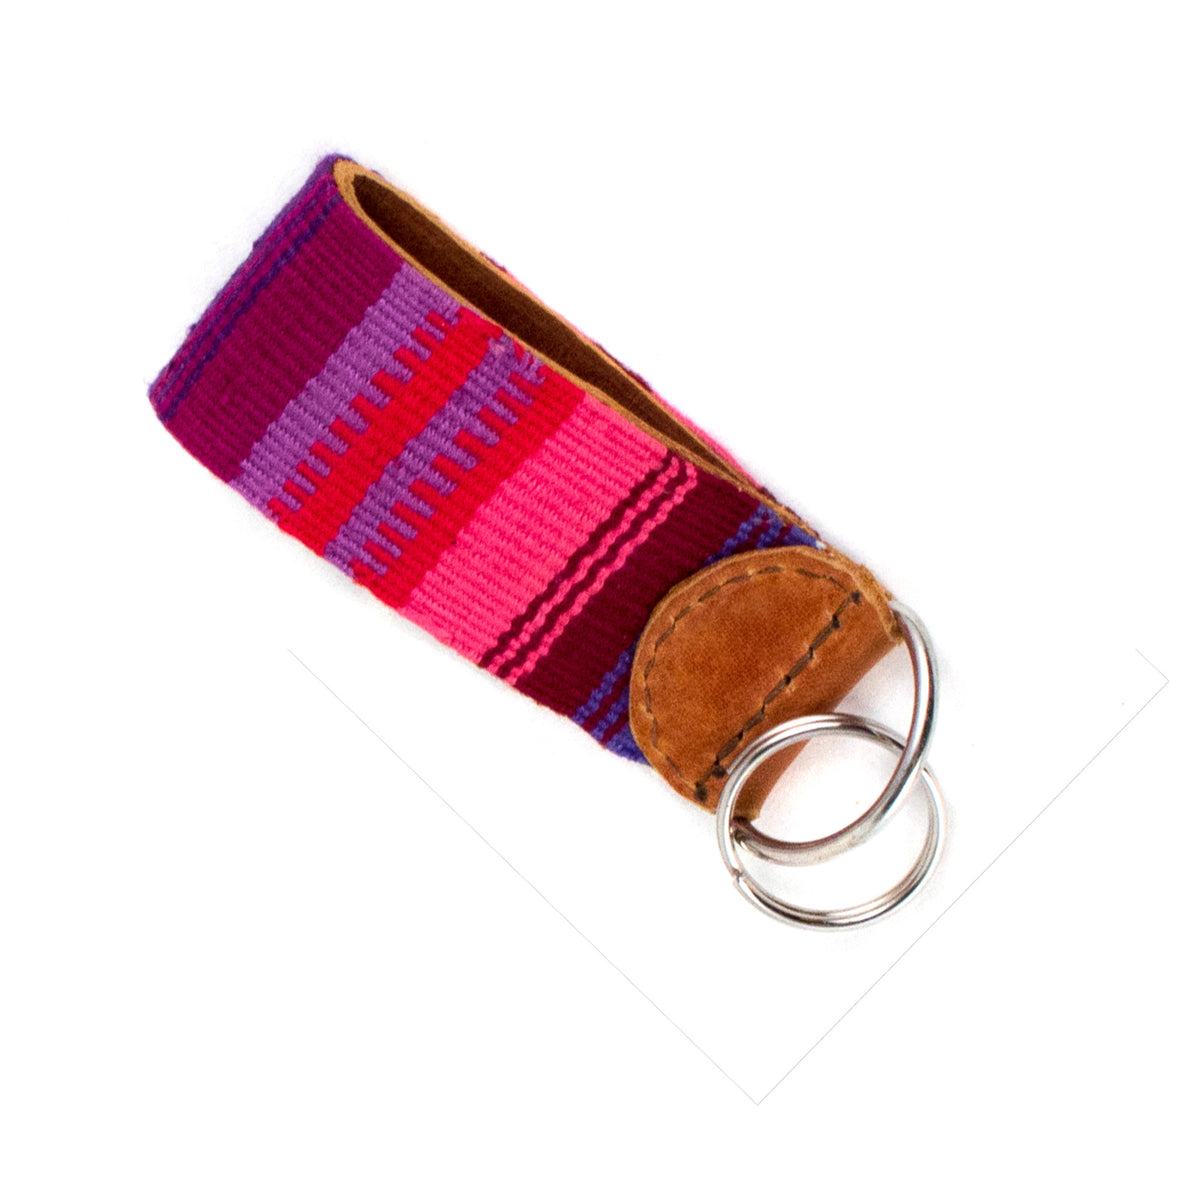 Handwoven Key Fob - pink and purple | Mayan Hands